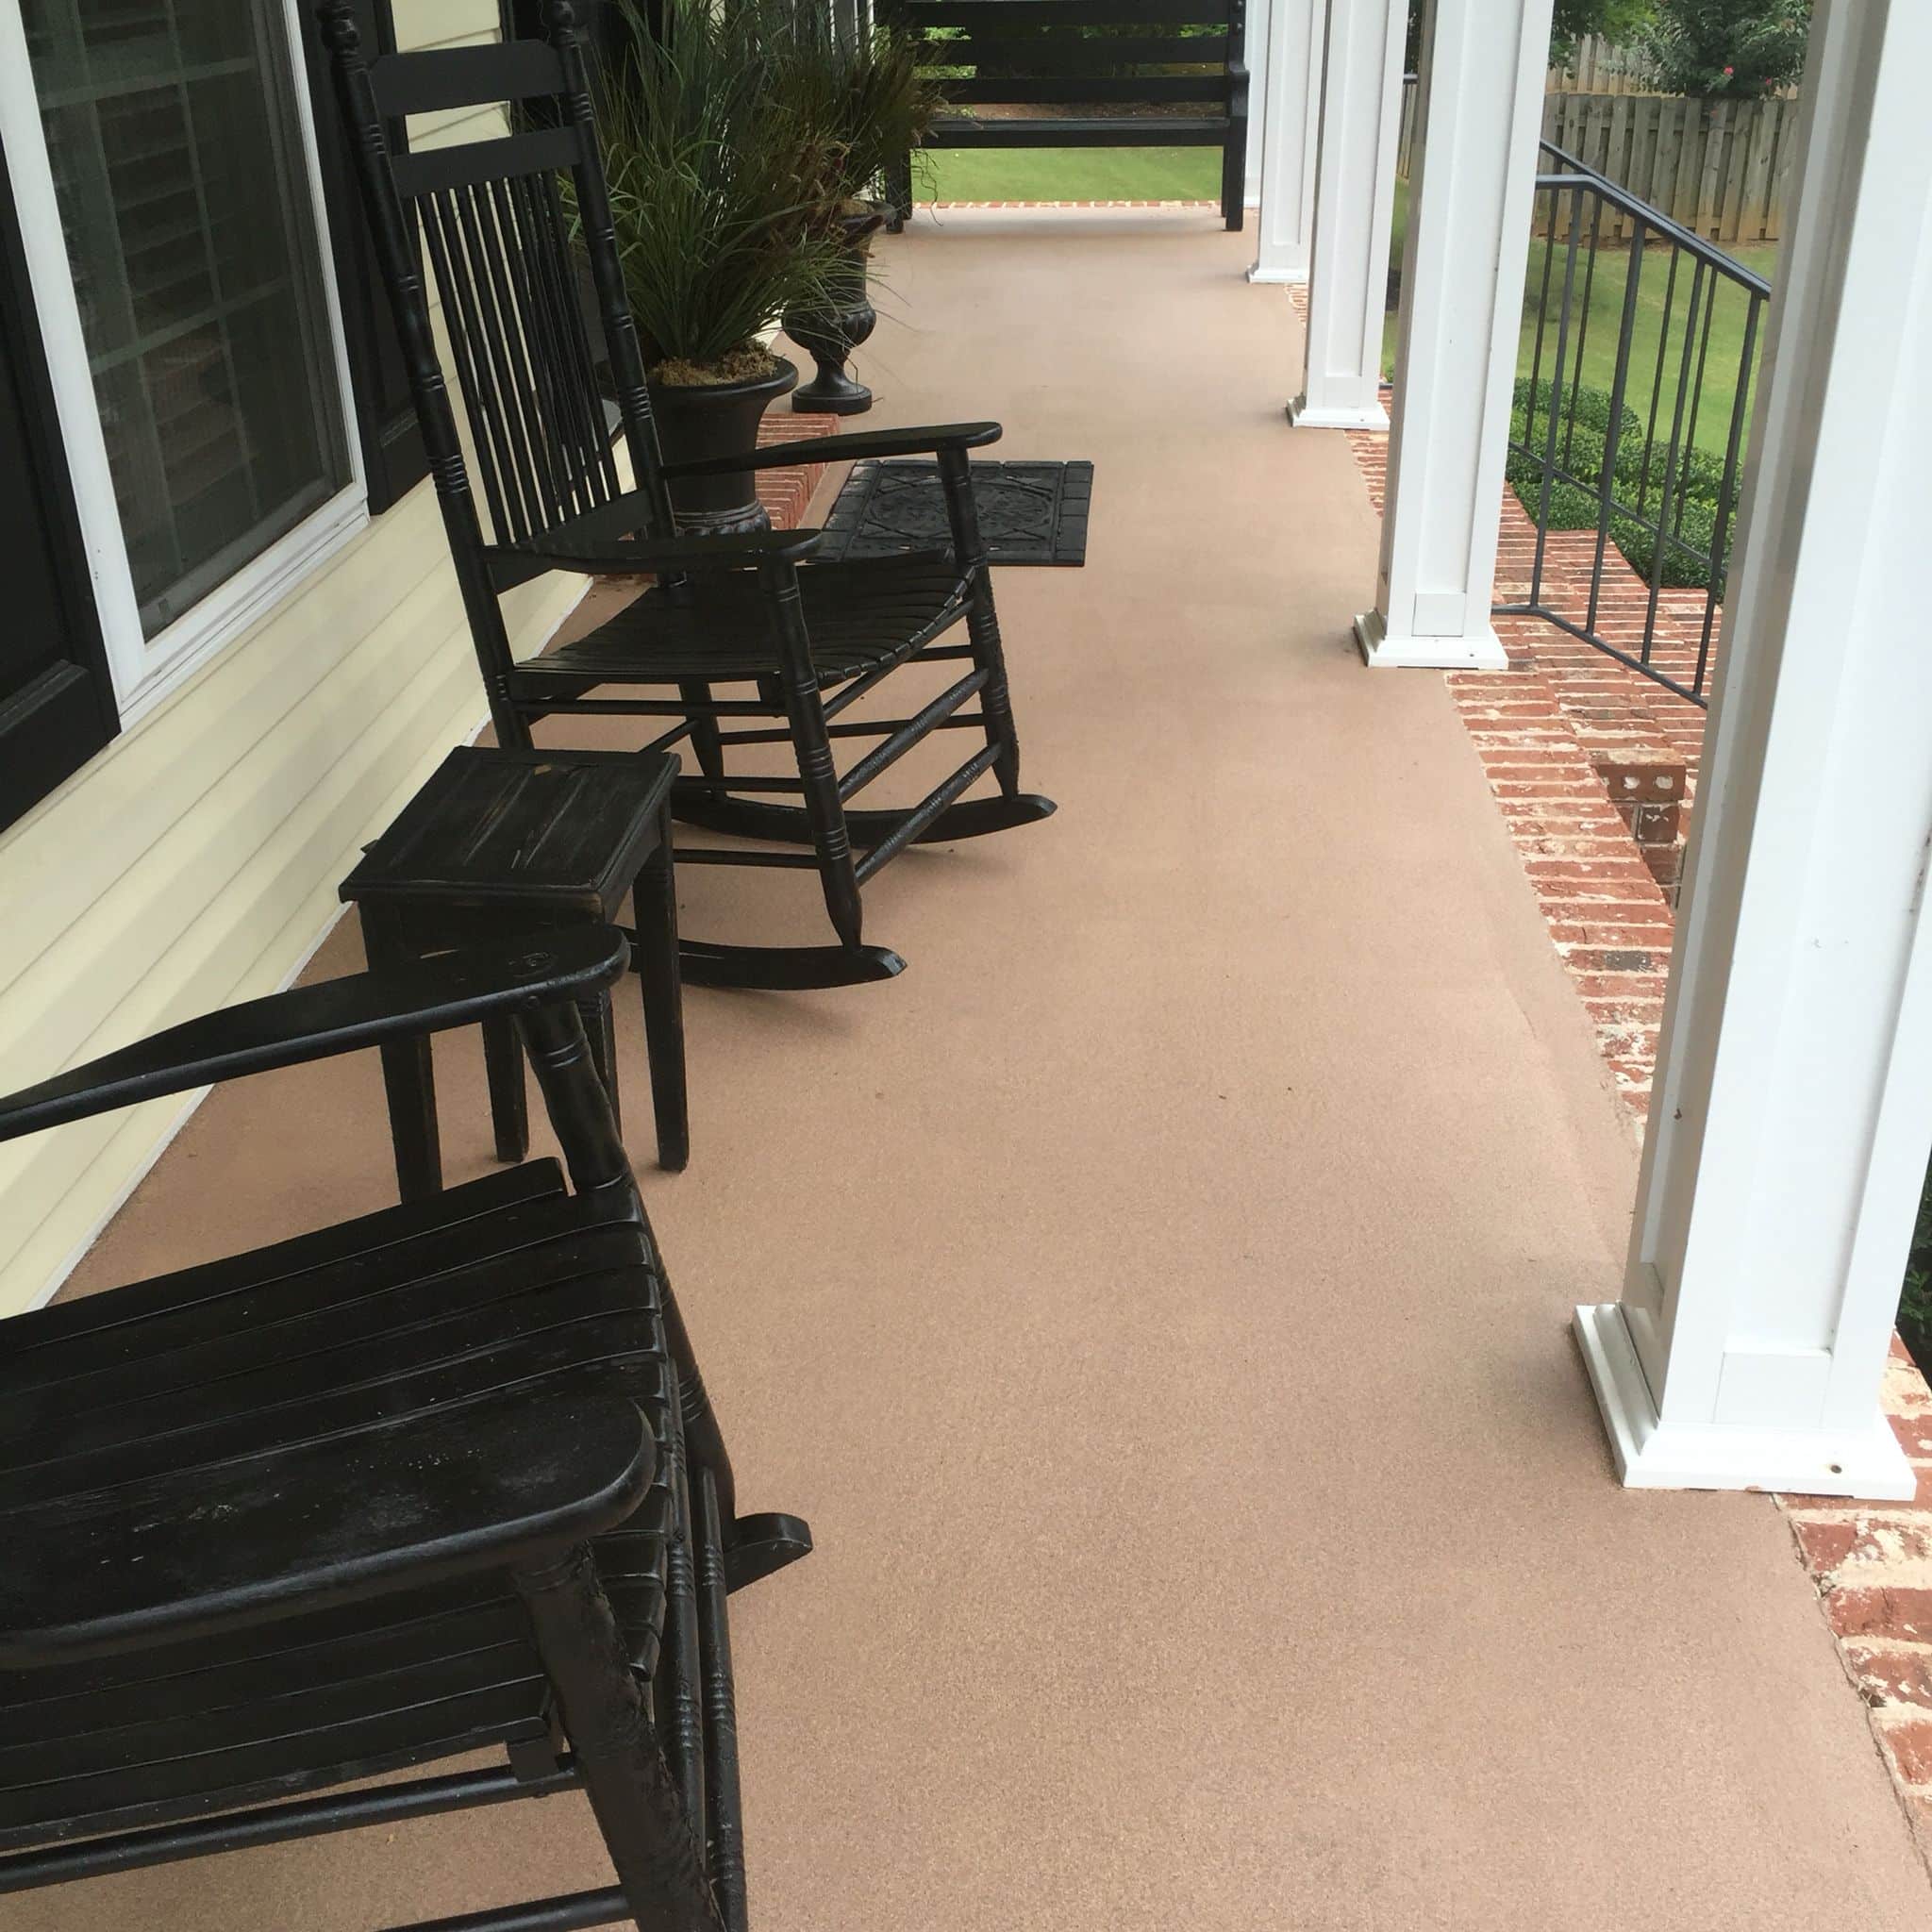 Concrete patio after painted with Behr Granite Grip paint